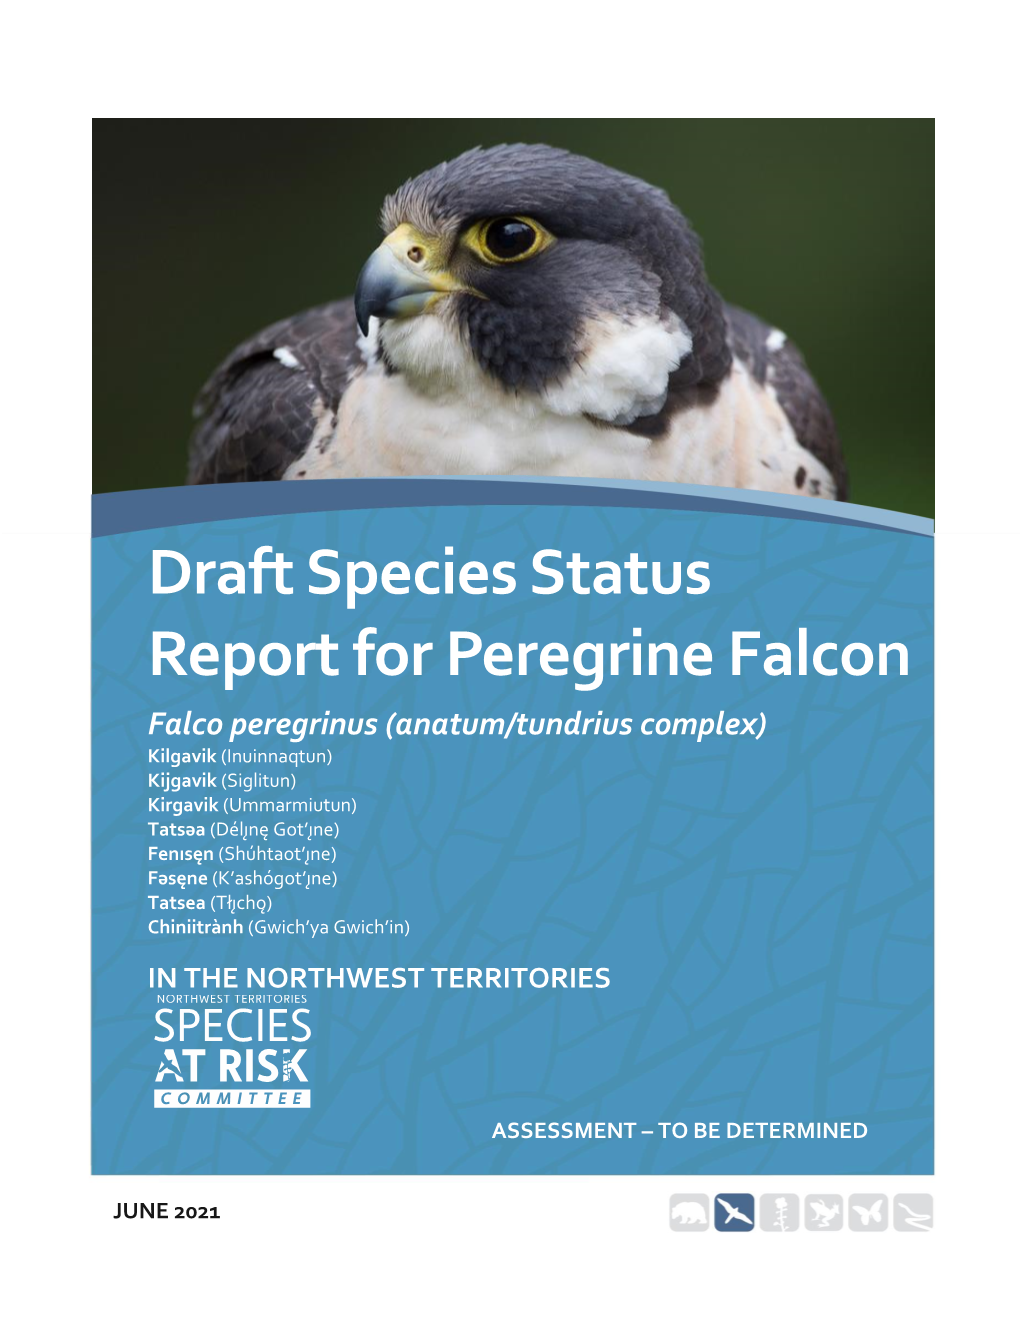 Draft Status Report for Peregrine Falcon in The